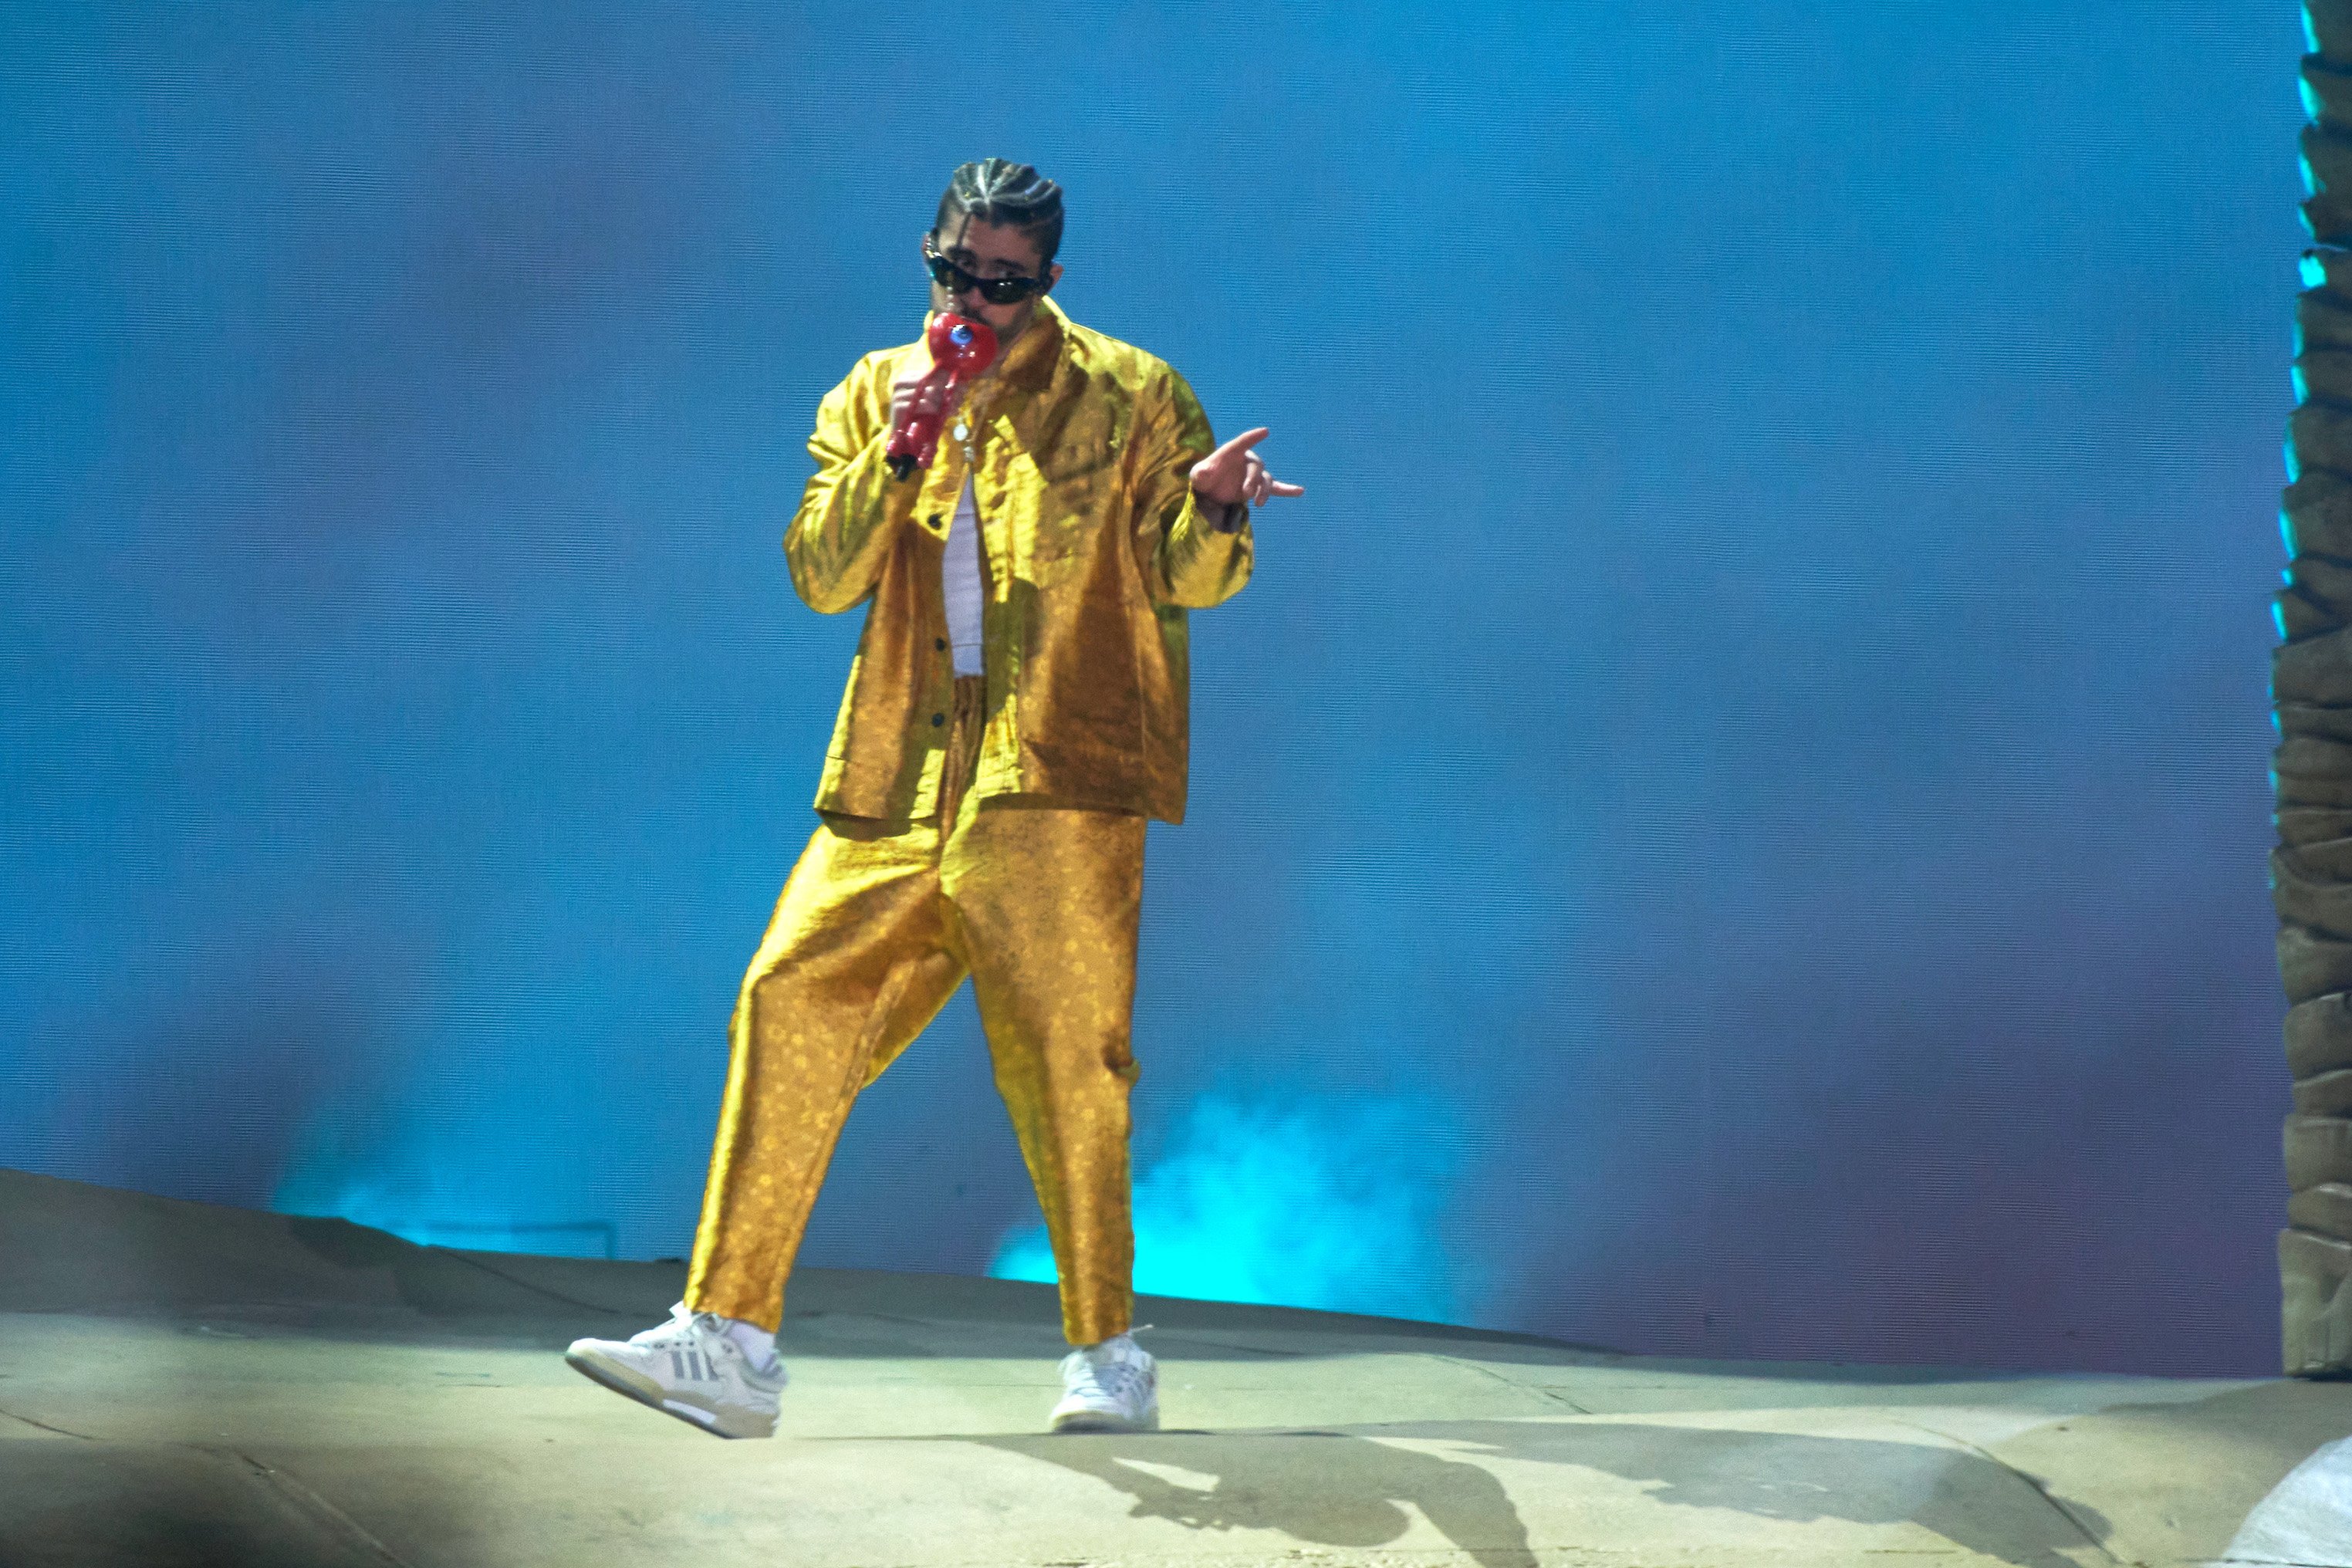 Bad Bunny performing during his second concert at Azteca Stadium, as a part of World Hottest Tour